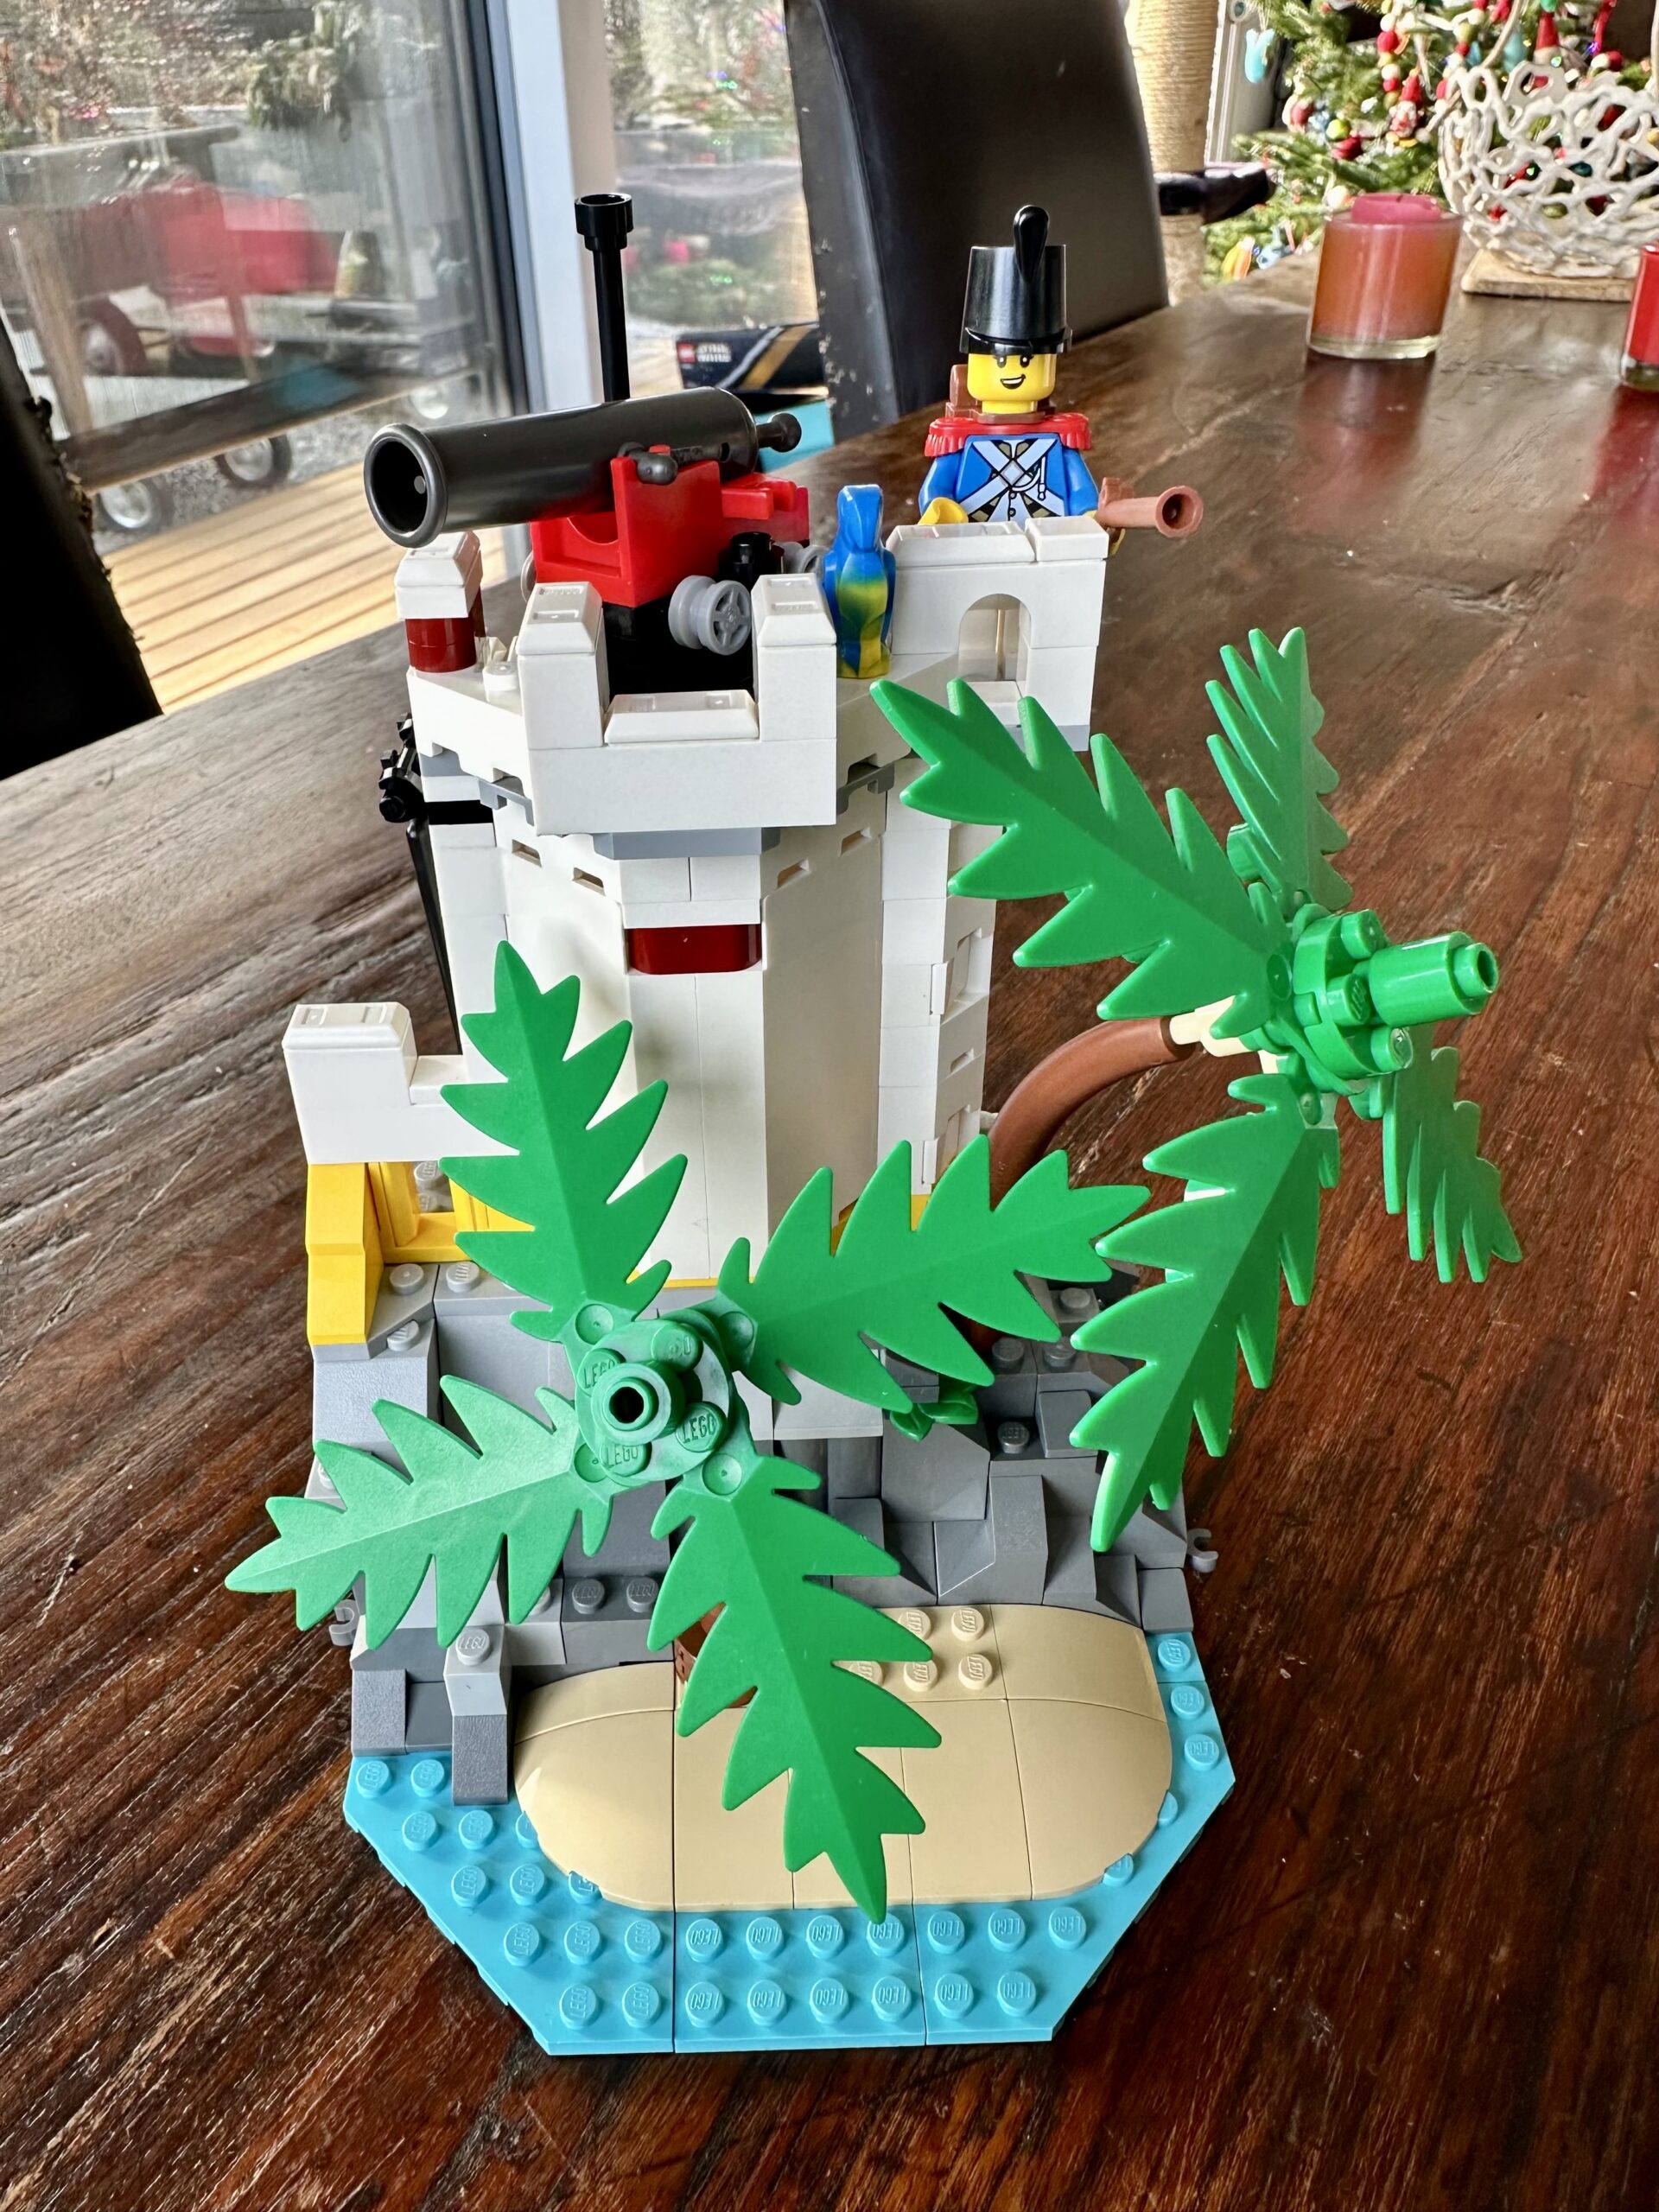 LEGO build of set 10320 Eldorado Fortress in progress. A small white tower with cannon and an Imperial Guard atop it. A sand beach and two palm trees are in front.